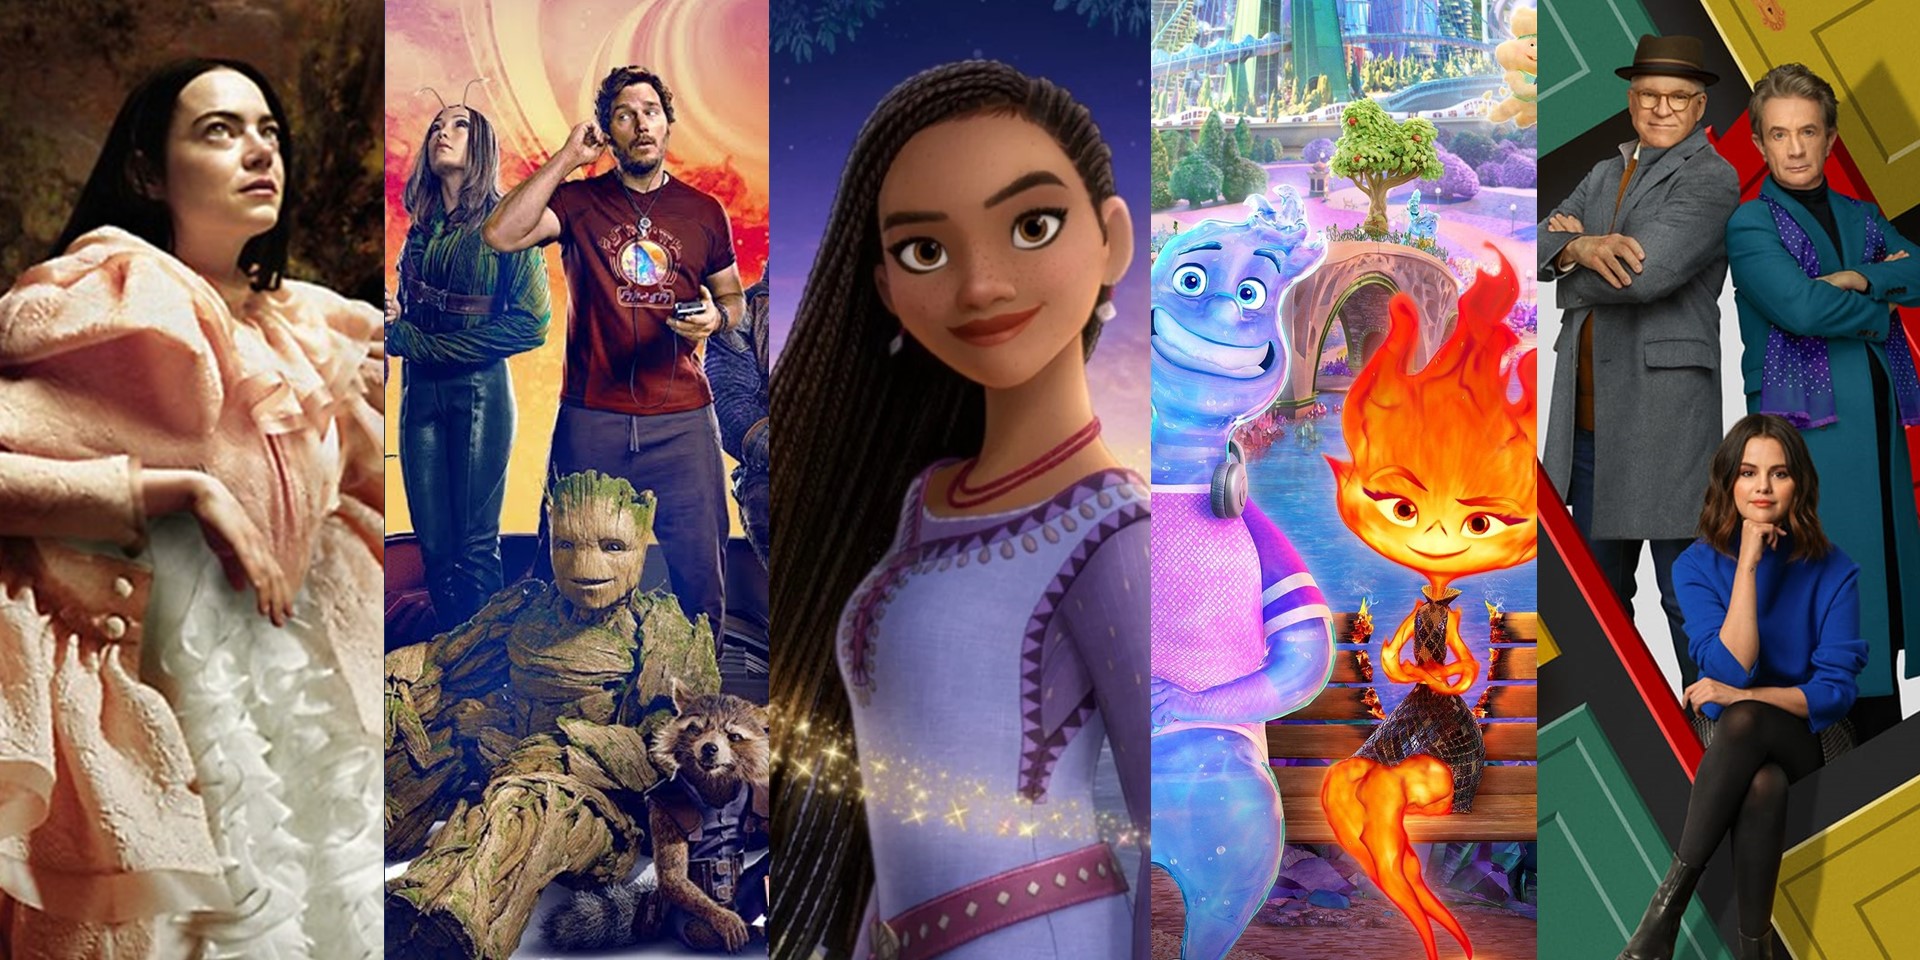 These are the Golden Globe Award Nominations earned by The Walt Disney Company